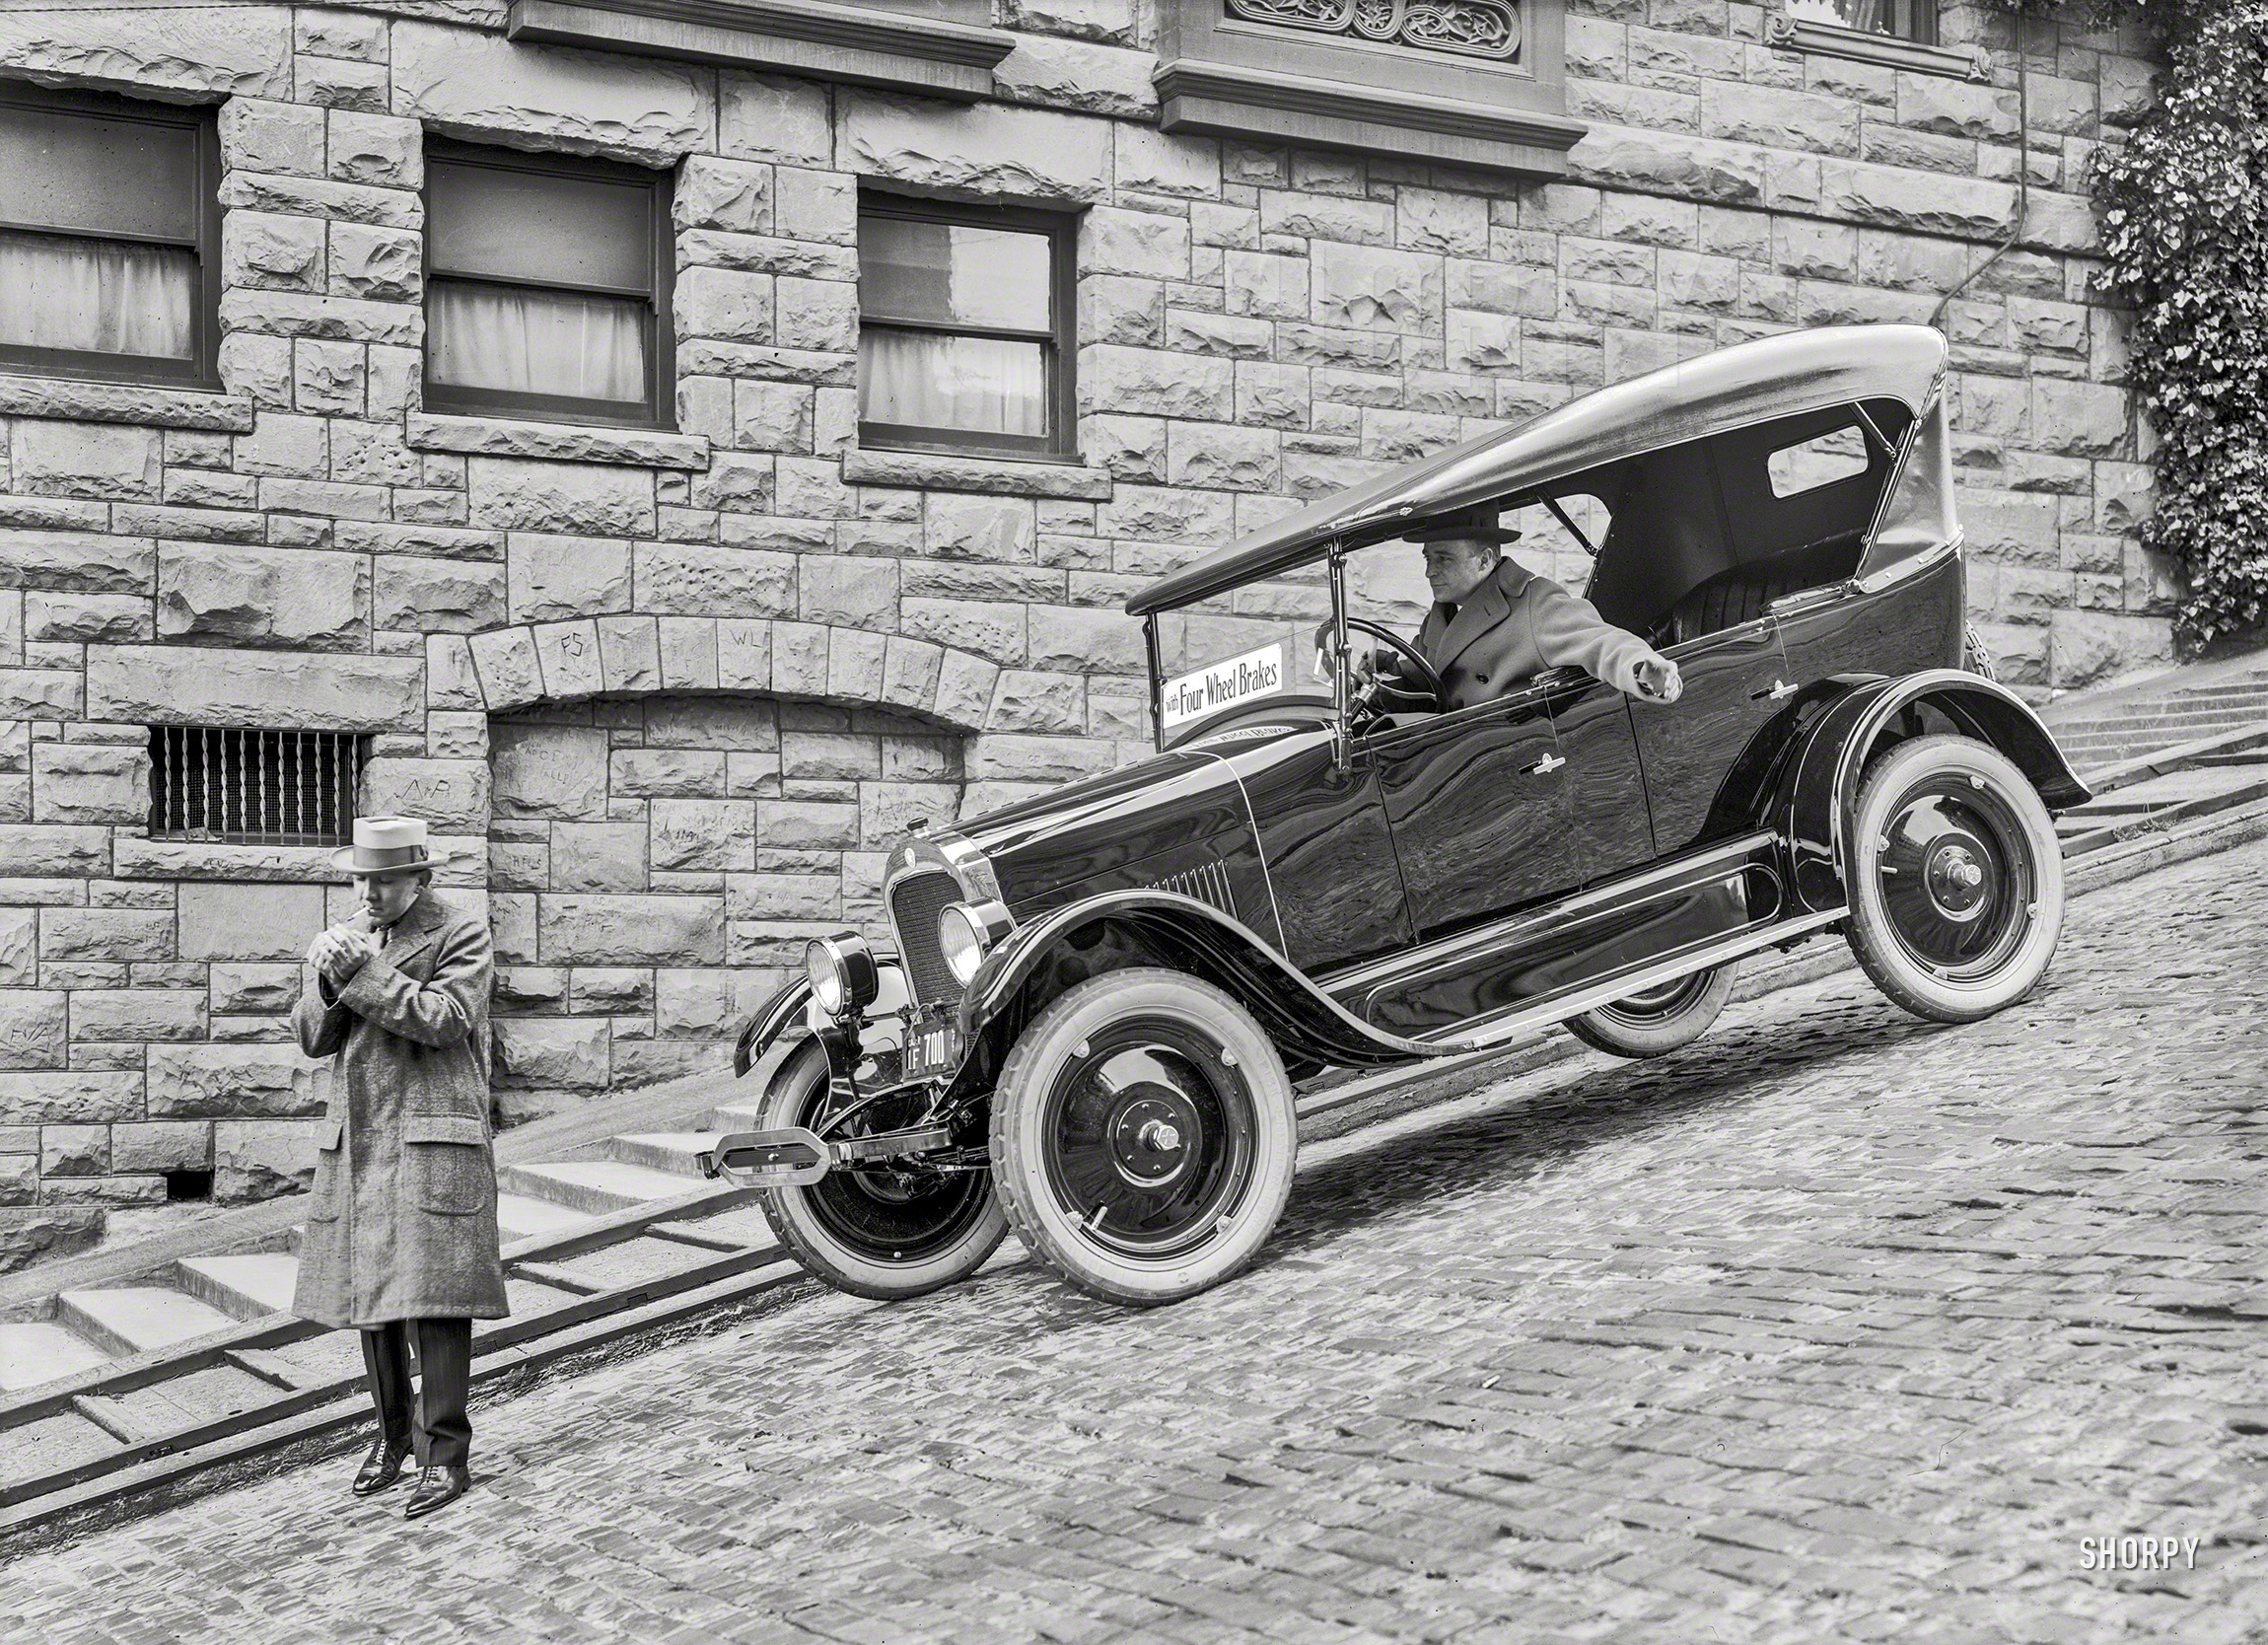 San Francisco circa 1924. "Star touring car with four-wheel brakes." The same venue (and graffitists) as our previous Star sighting. And more evidence that smoking is hazardous to your health. 5x7 glass negative. View full size.